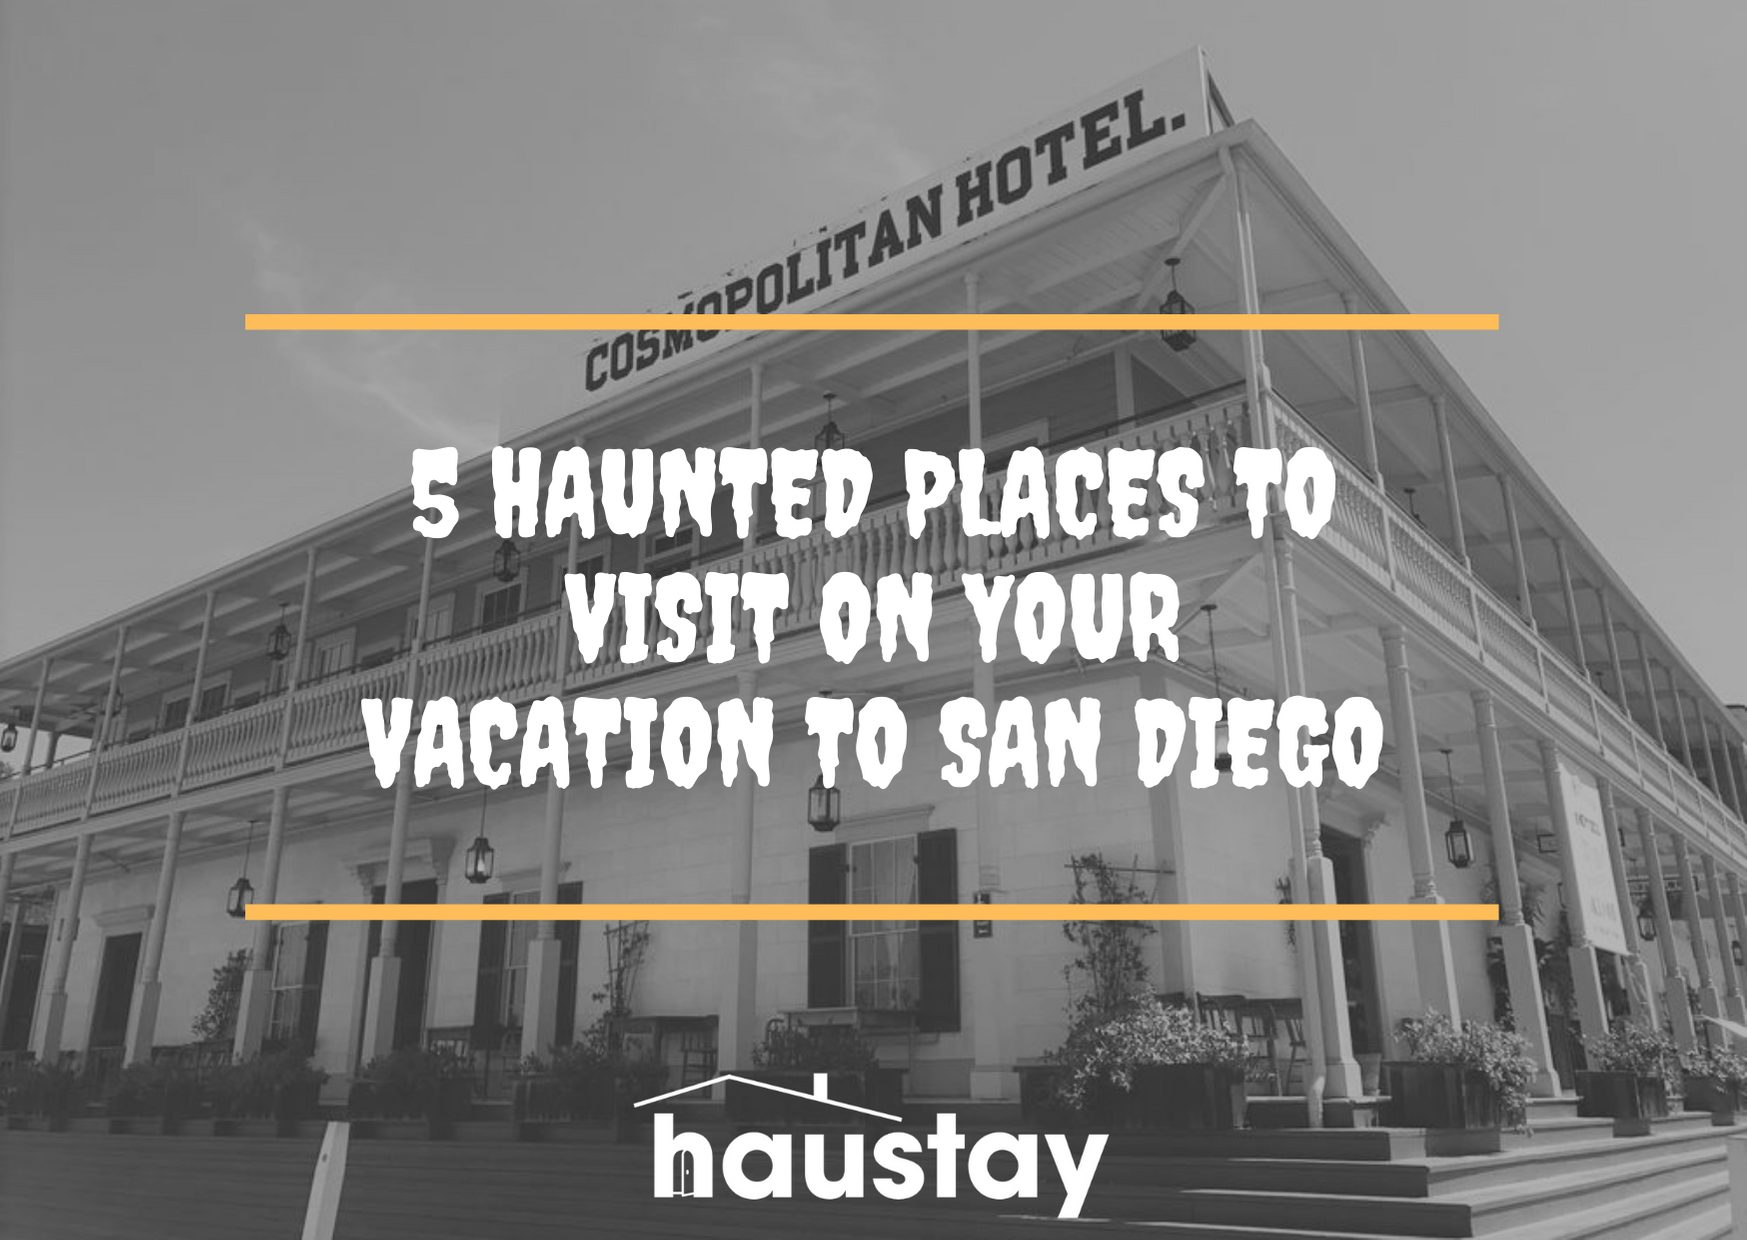 5 Haunted Places to Visit on Your Vacation to San Diego